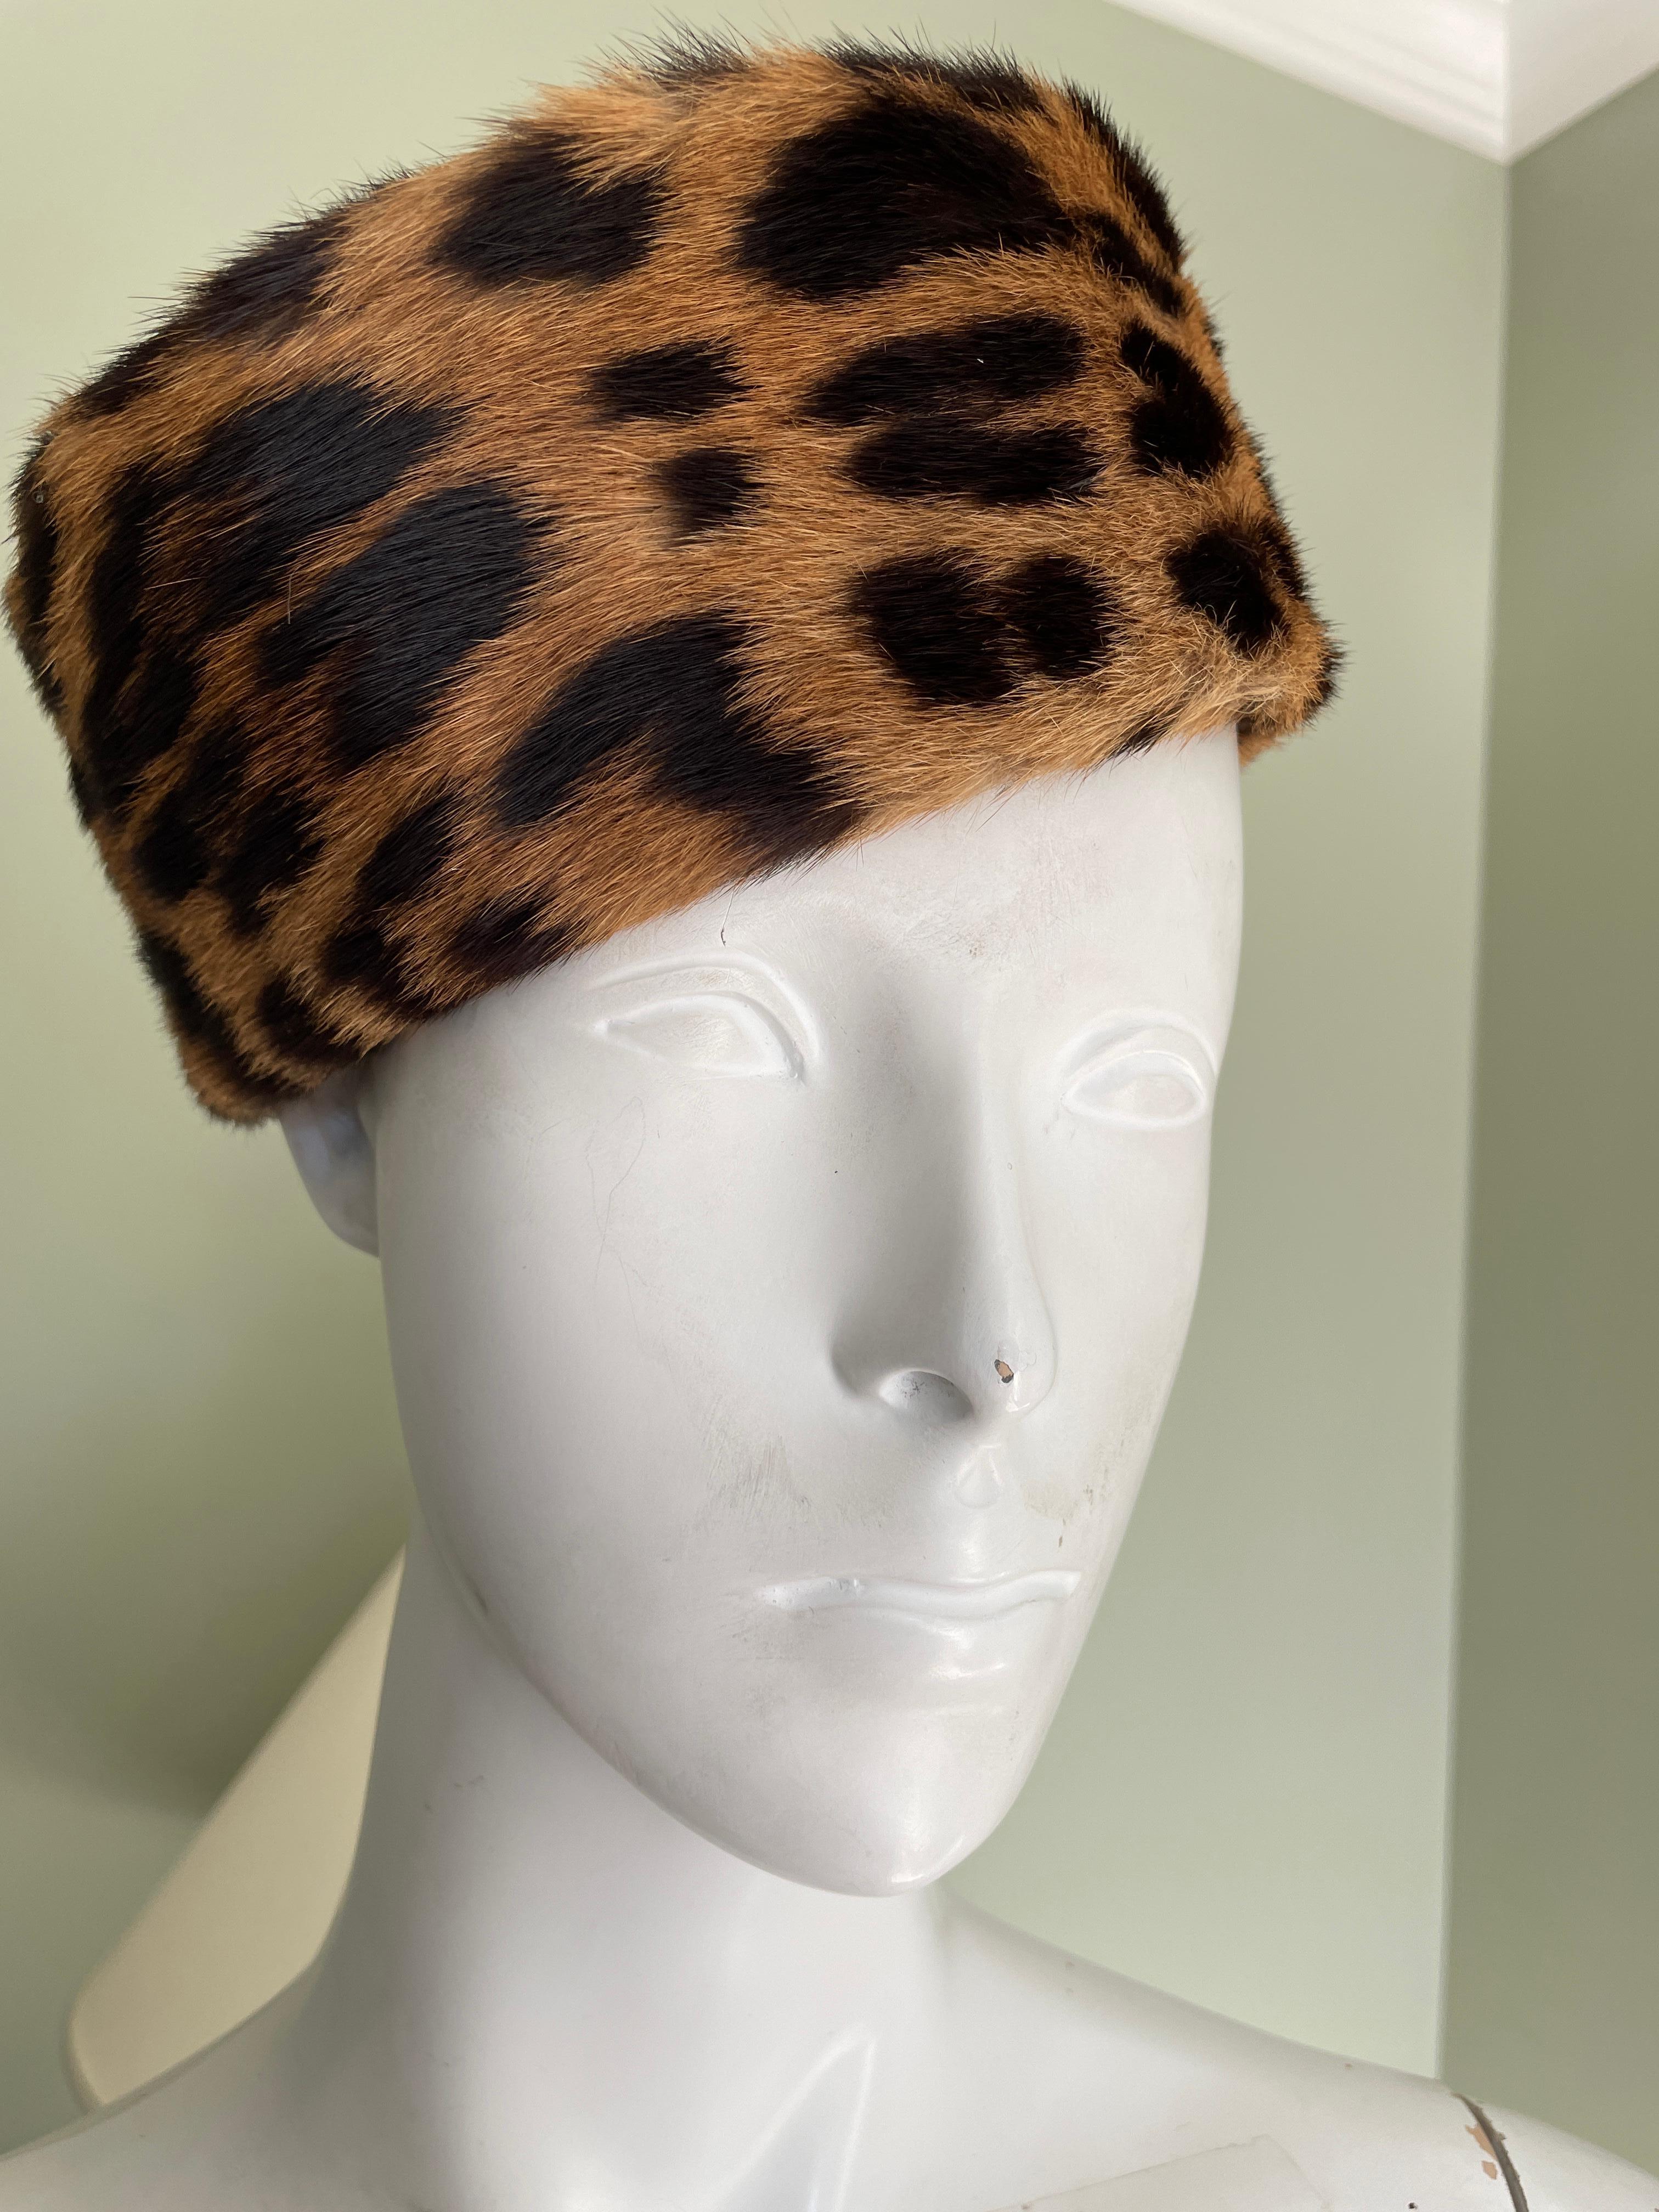 Classic 1960 Animal Print Pillbox Hat
20.5 inch Circumference
In excellent pre owned condition